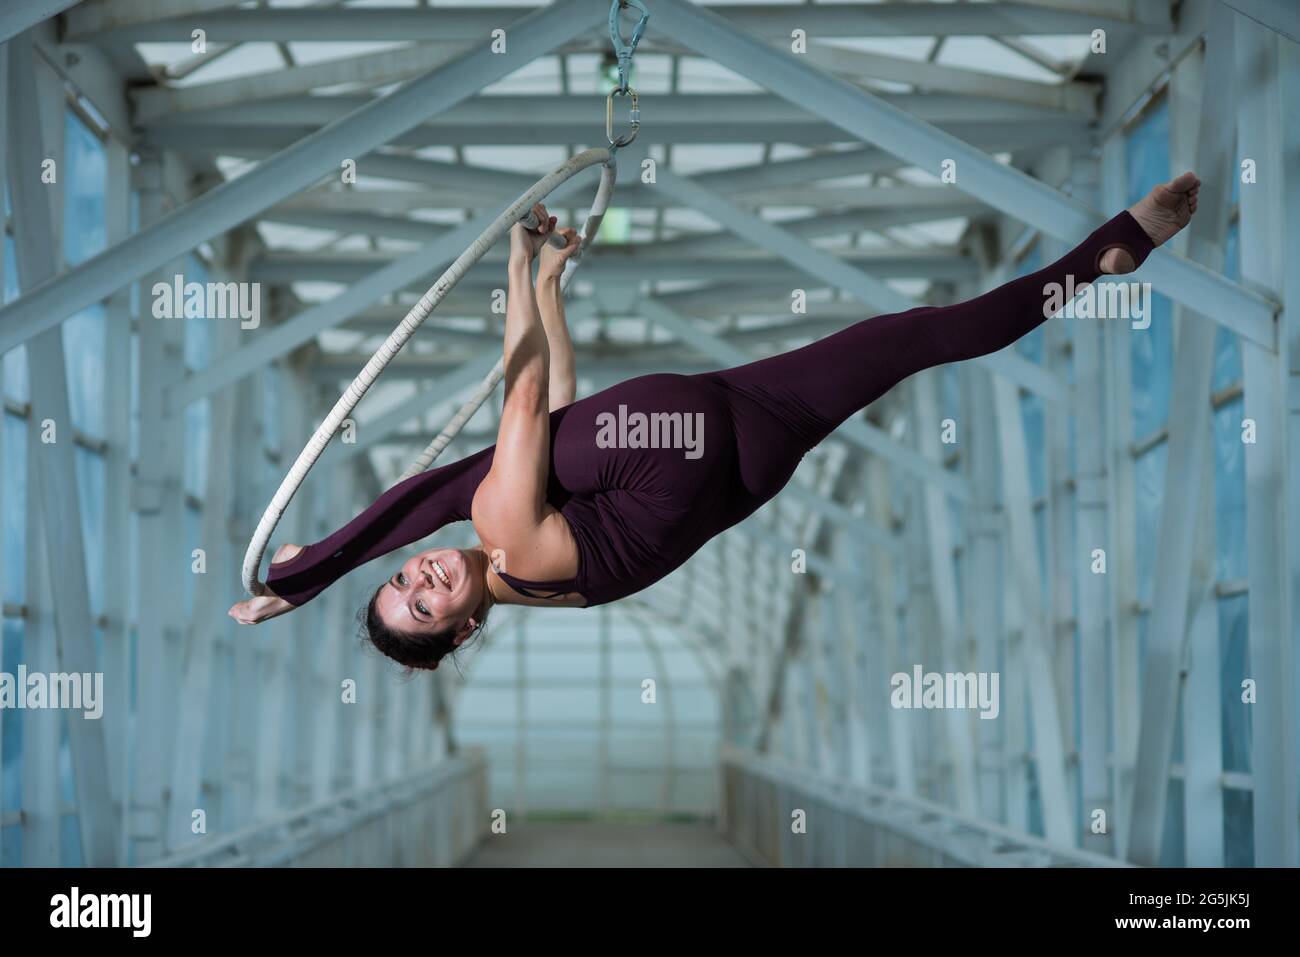 An air gymnast makes a Russian splits on an air hoop suspended on a metal truss. circus actress on the airy ring. Stock Photo